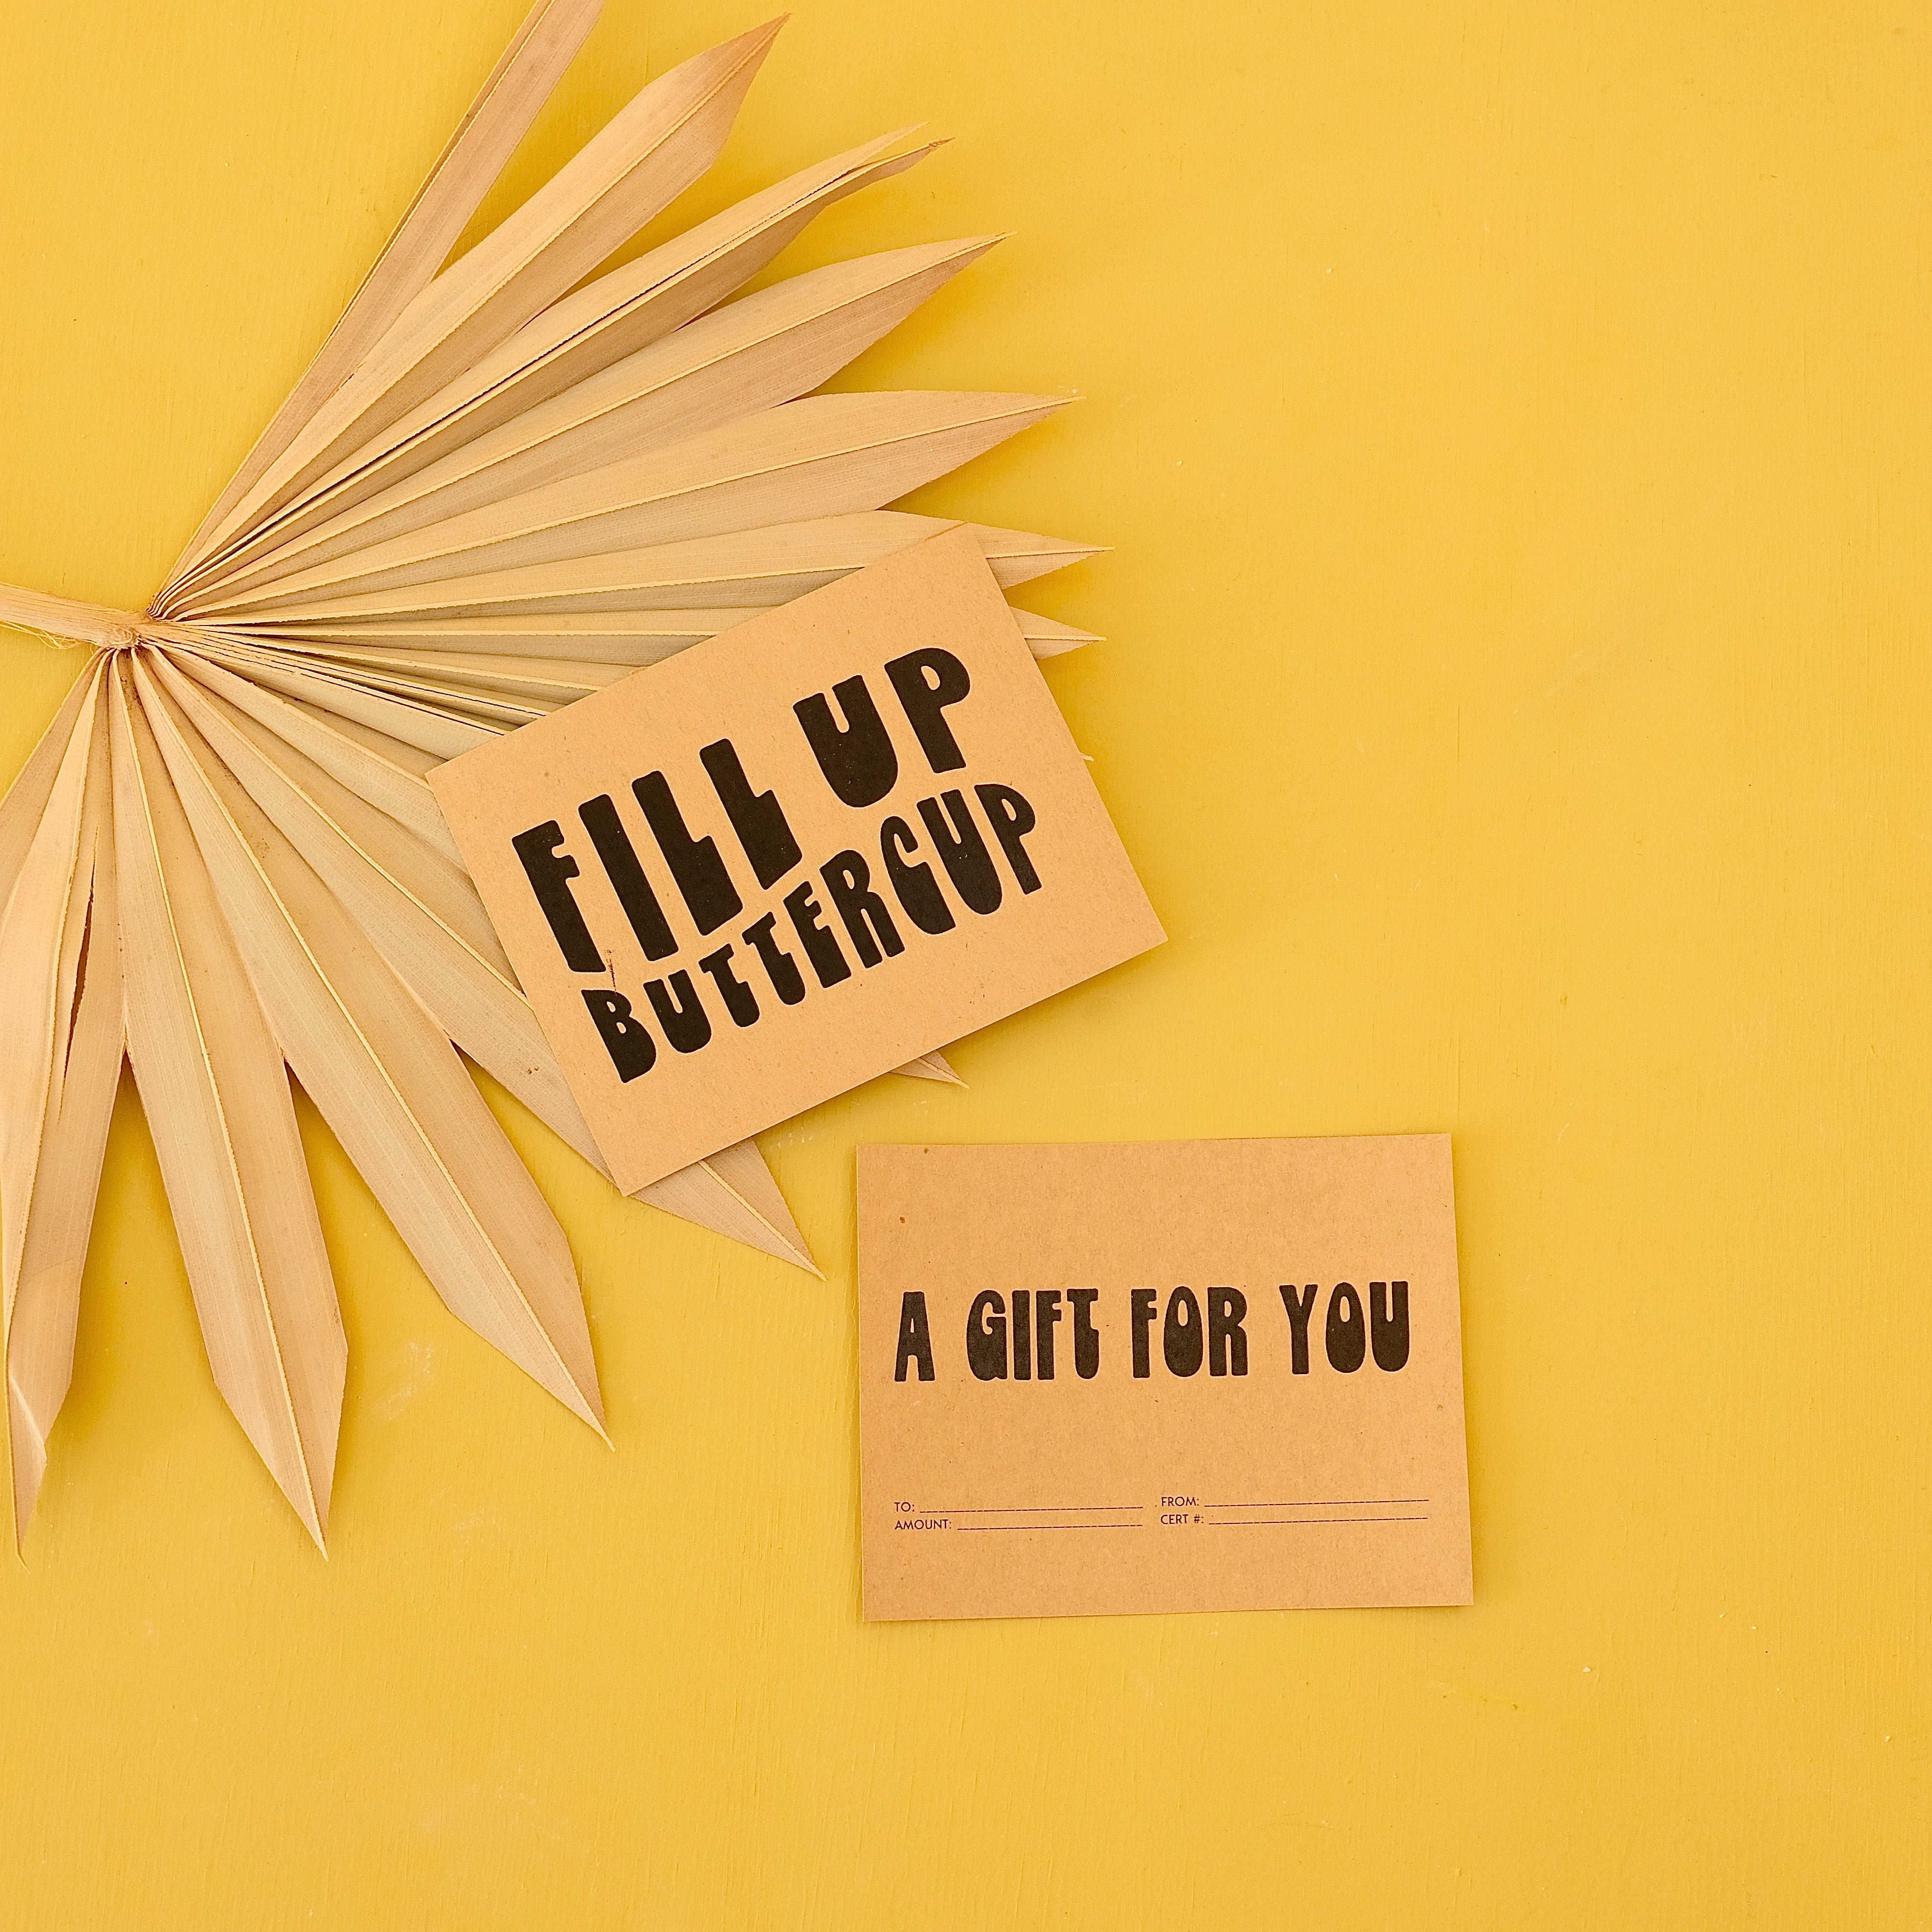 GIFT CARD – Fill Up Buttercup